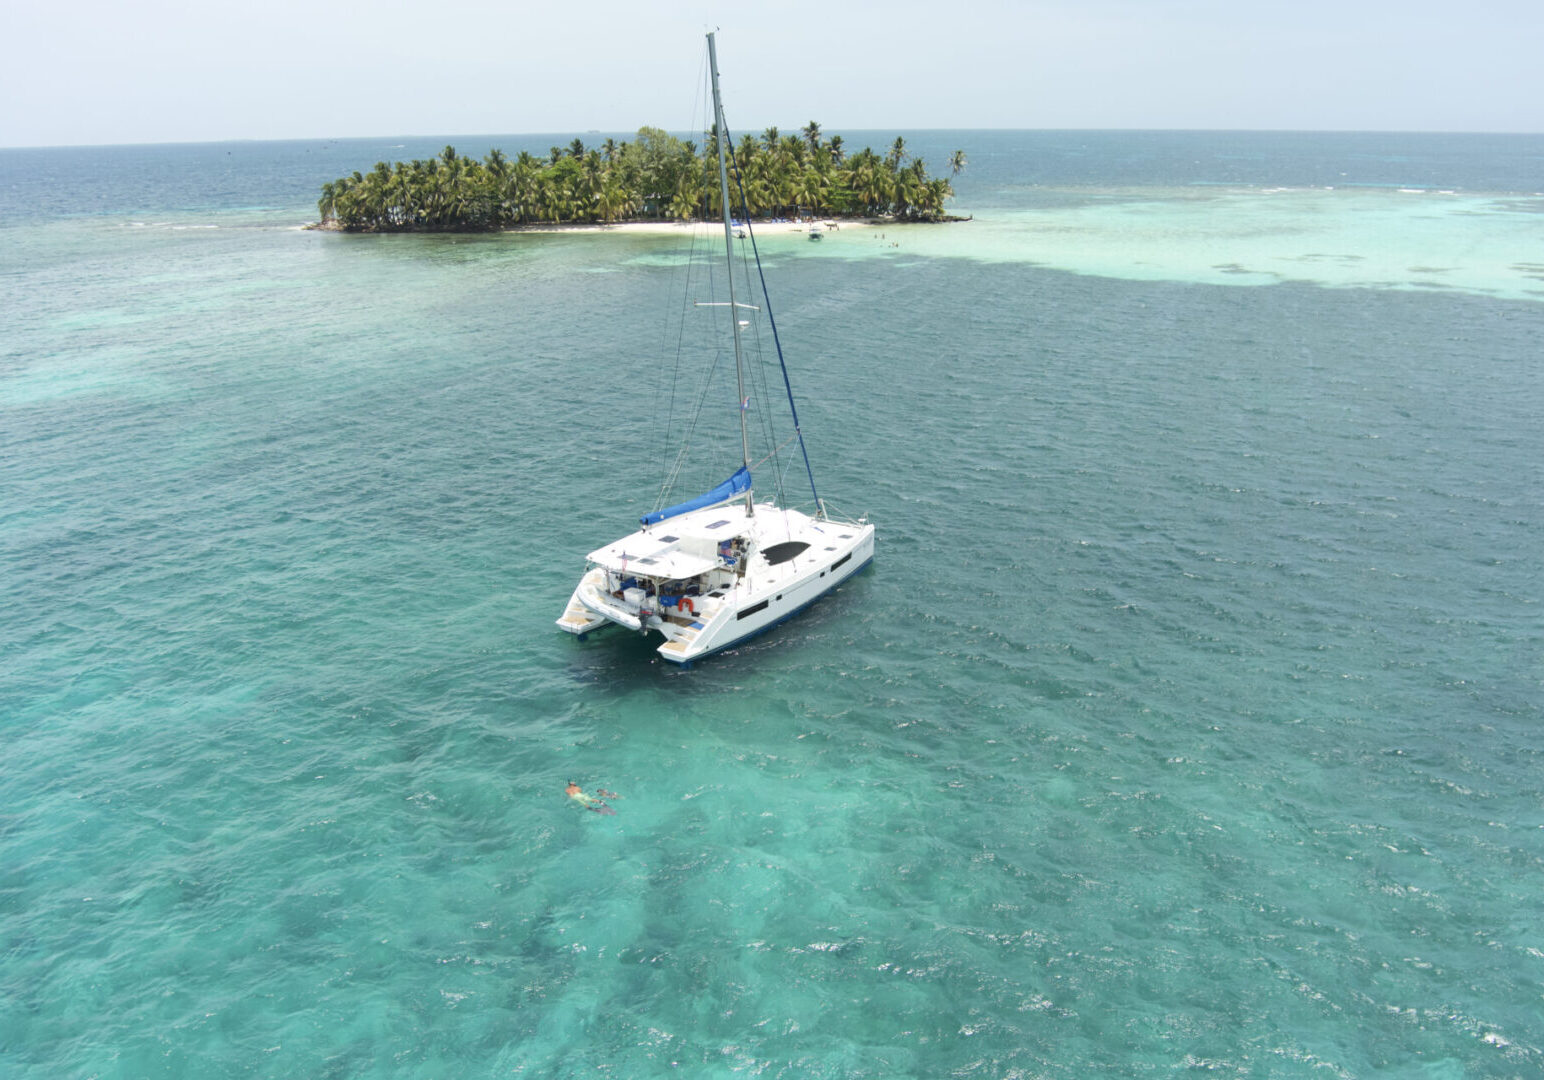 A white sailboat is floating in the water near a small island, offering a picturesque scene for Belize Sailing Vacations and Tours.